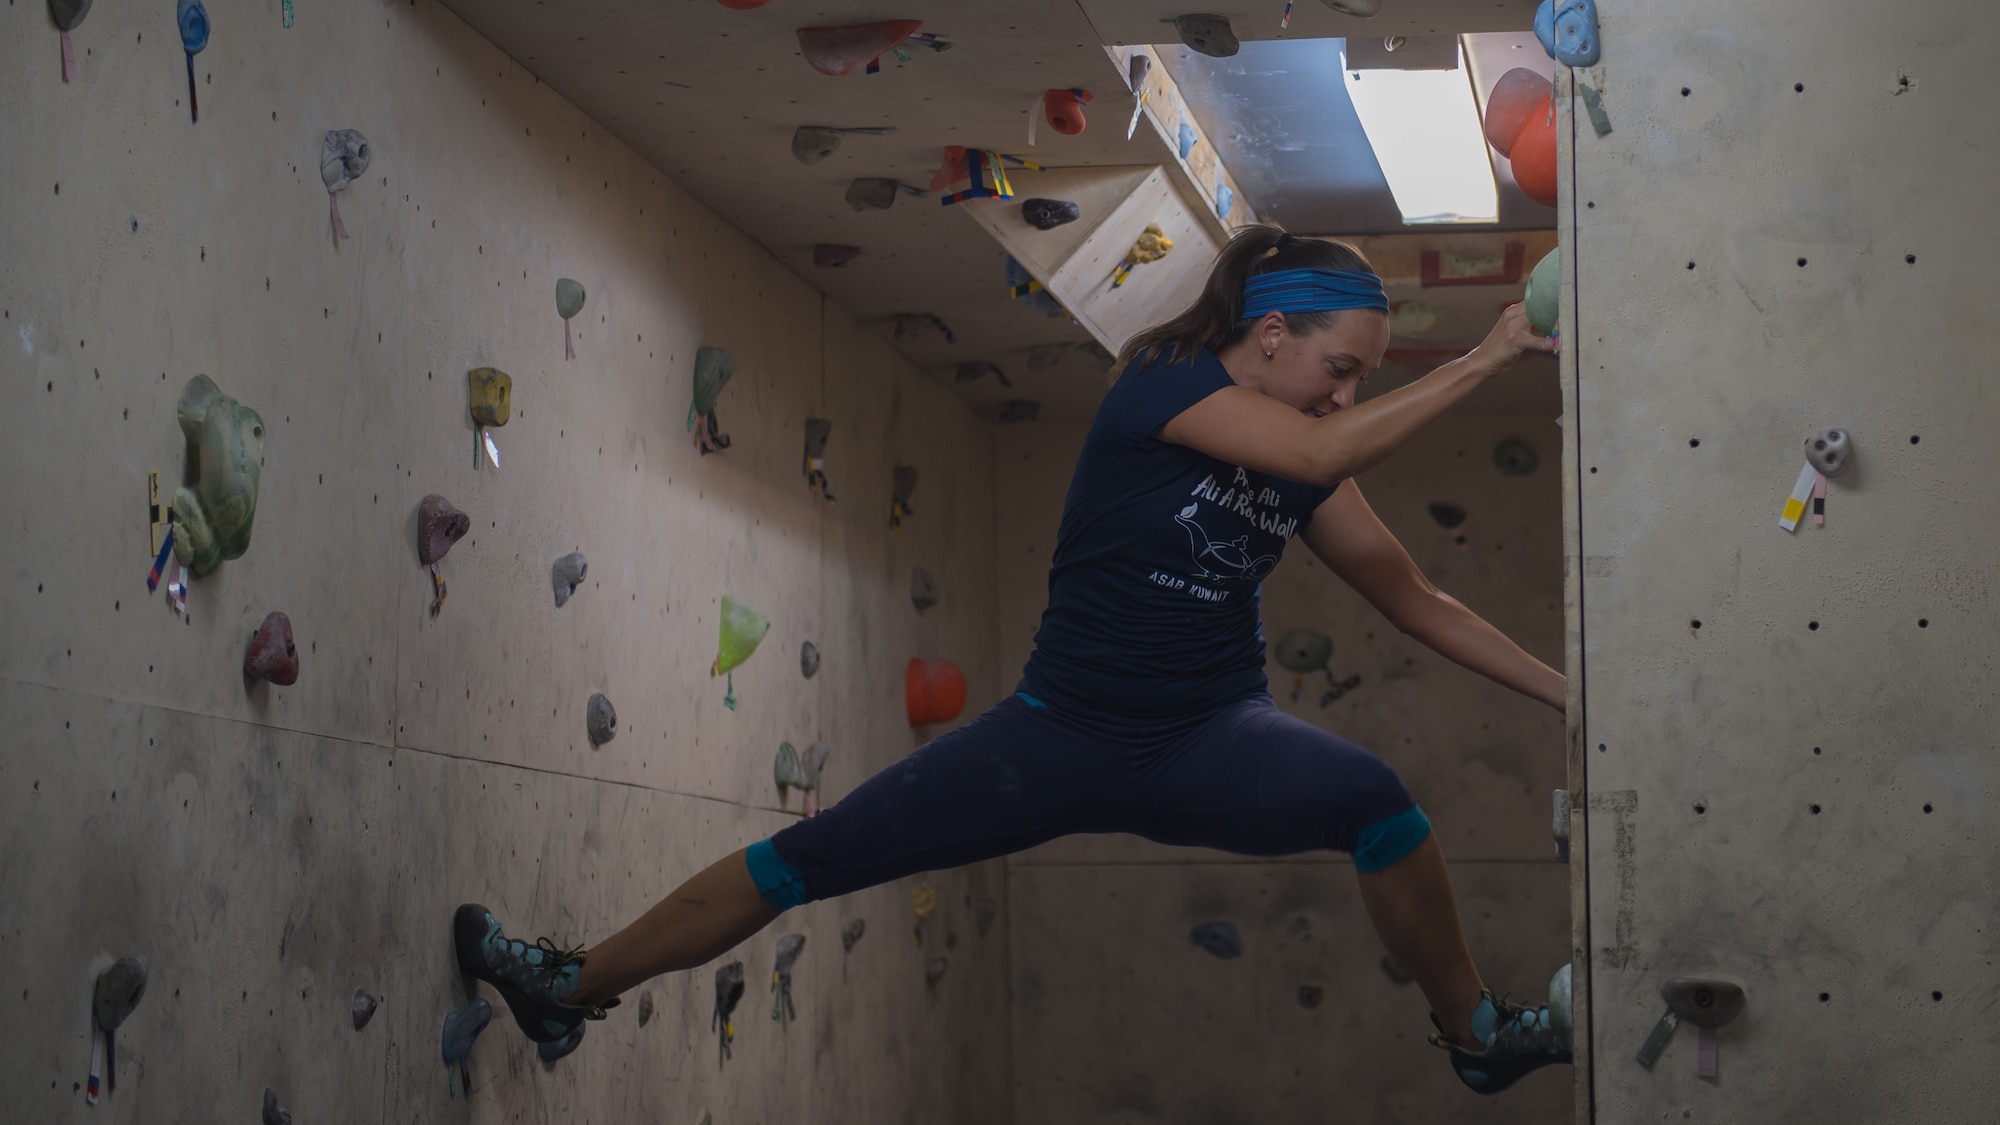 U.S. Air Force Maj. Breanna Gawrys, 386th Expeditionary Medical Group physician, climbs the bouldering wall near the Flex Gym on Ali Al Salem Air Base, Kuwait, June 30, 2019. Gawrys worked with a colleague to renovate the wall and provide an additional fitness option for ASAB personnel. (U.S. Air Force photo by Tech. Sgt. Daniel Martinez)